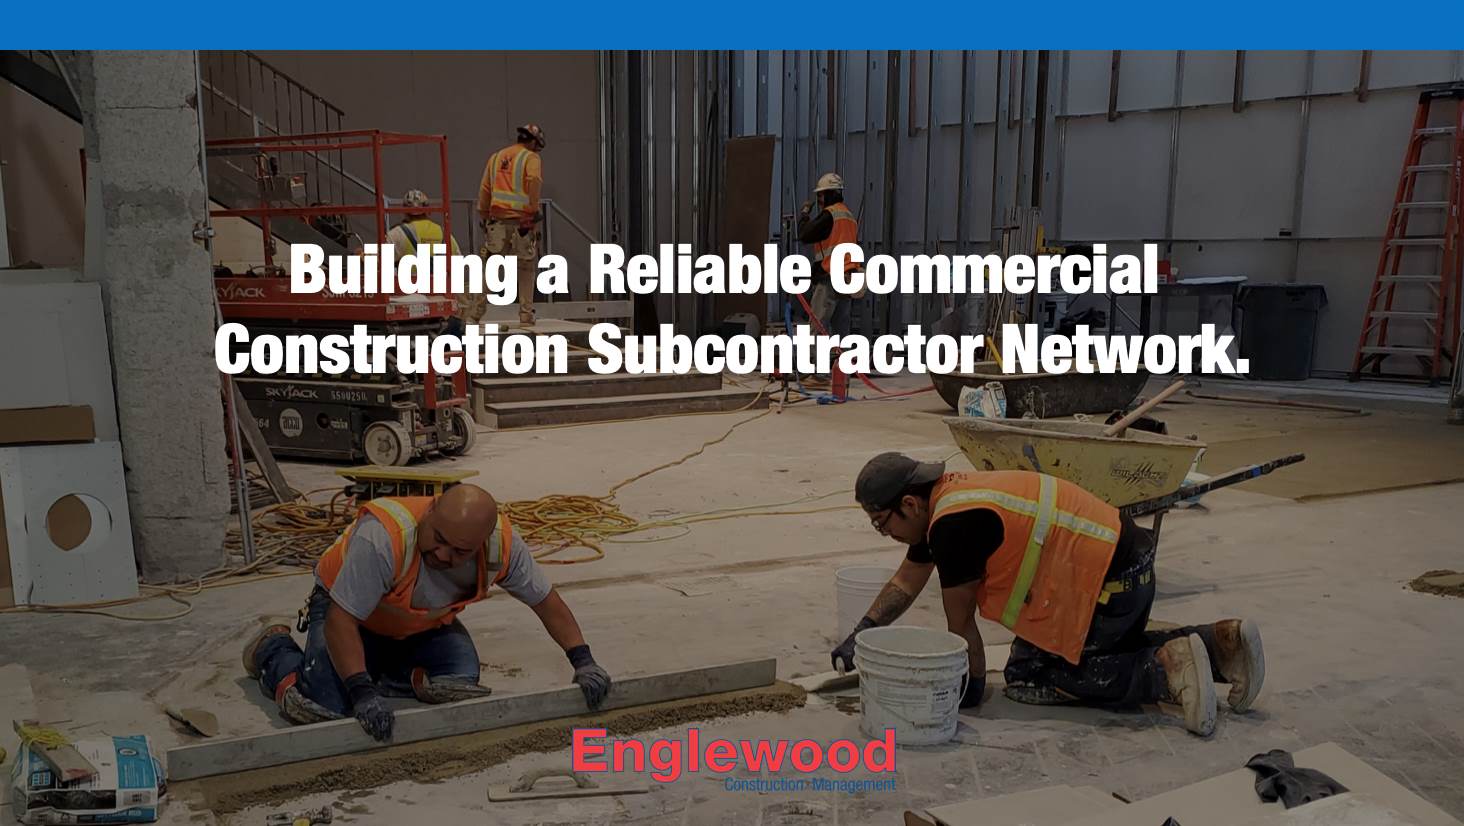 Building a Reliable Commercial Construction Subcontractor Network